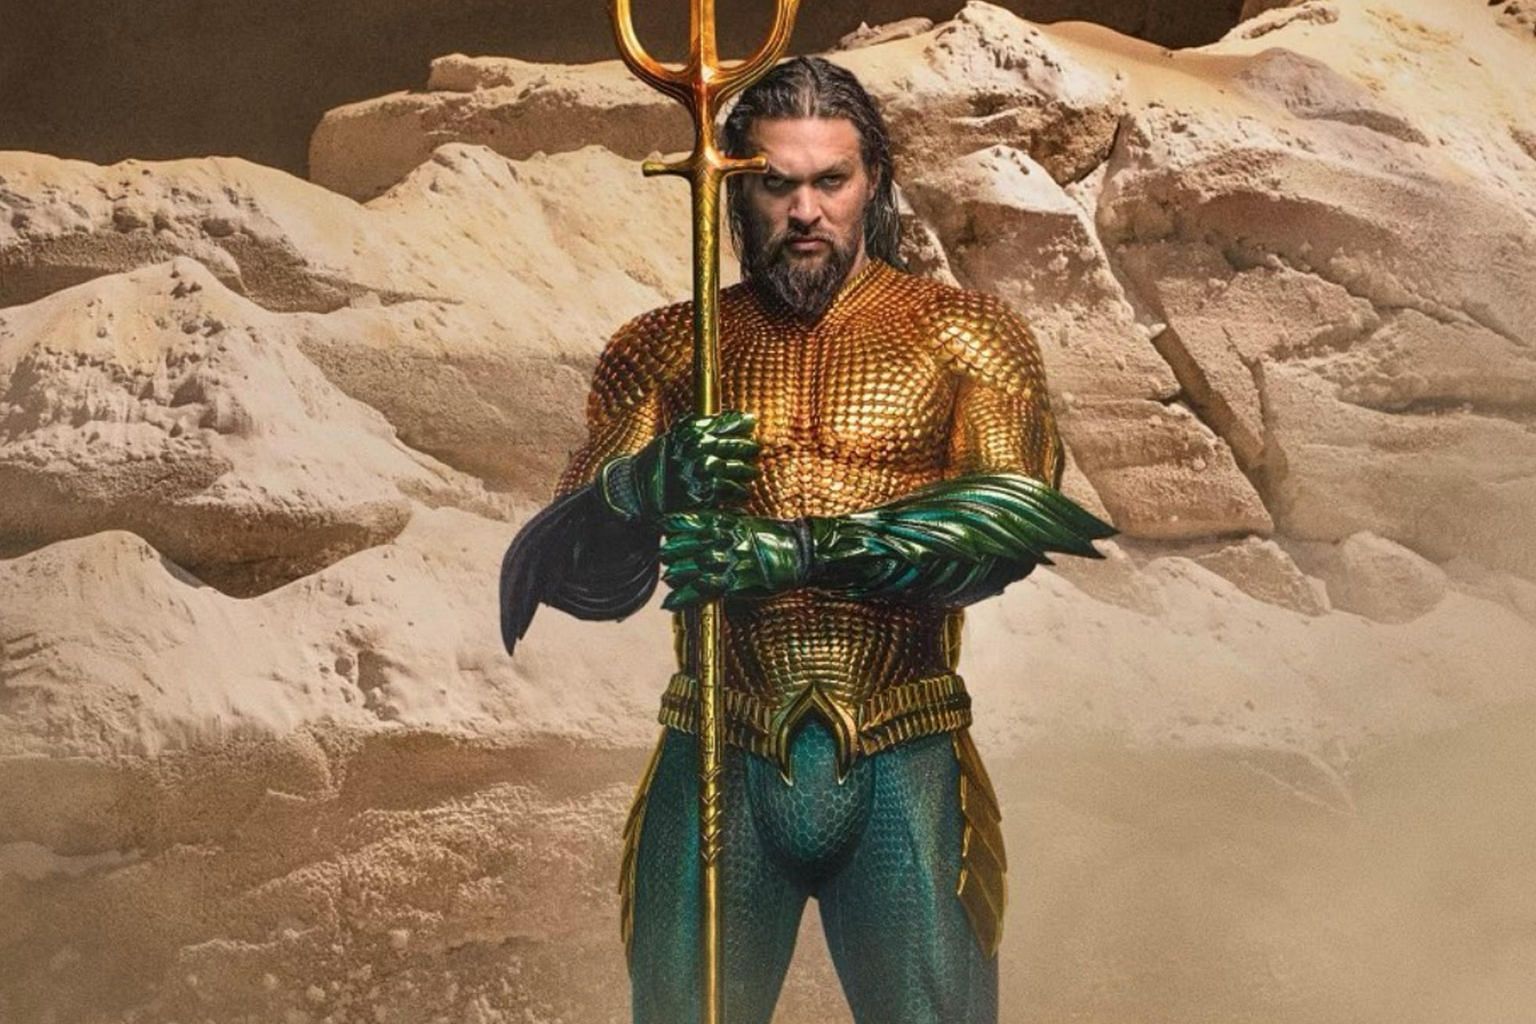 Aquaman Star Jason Momoa Tests Positive For Covid 19 On Set Of The Sequel Entertainment News Top Stories The Straits Times